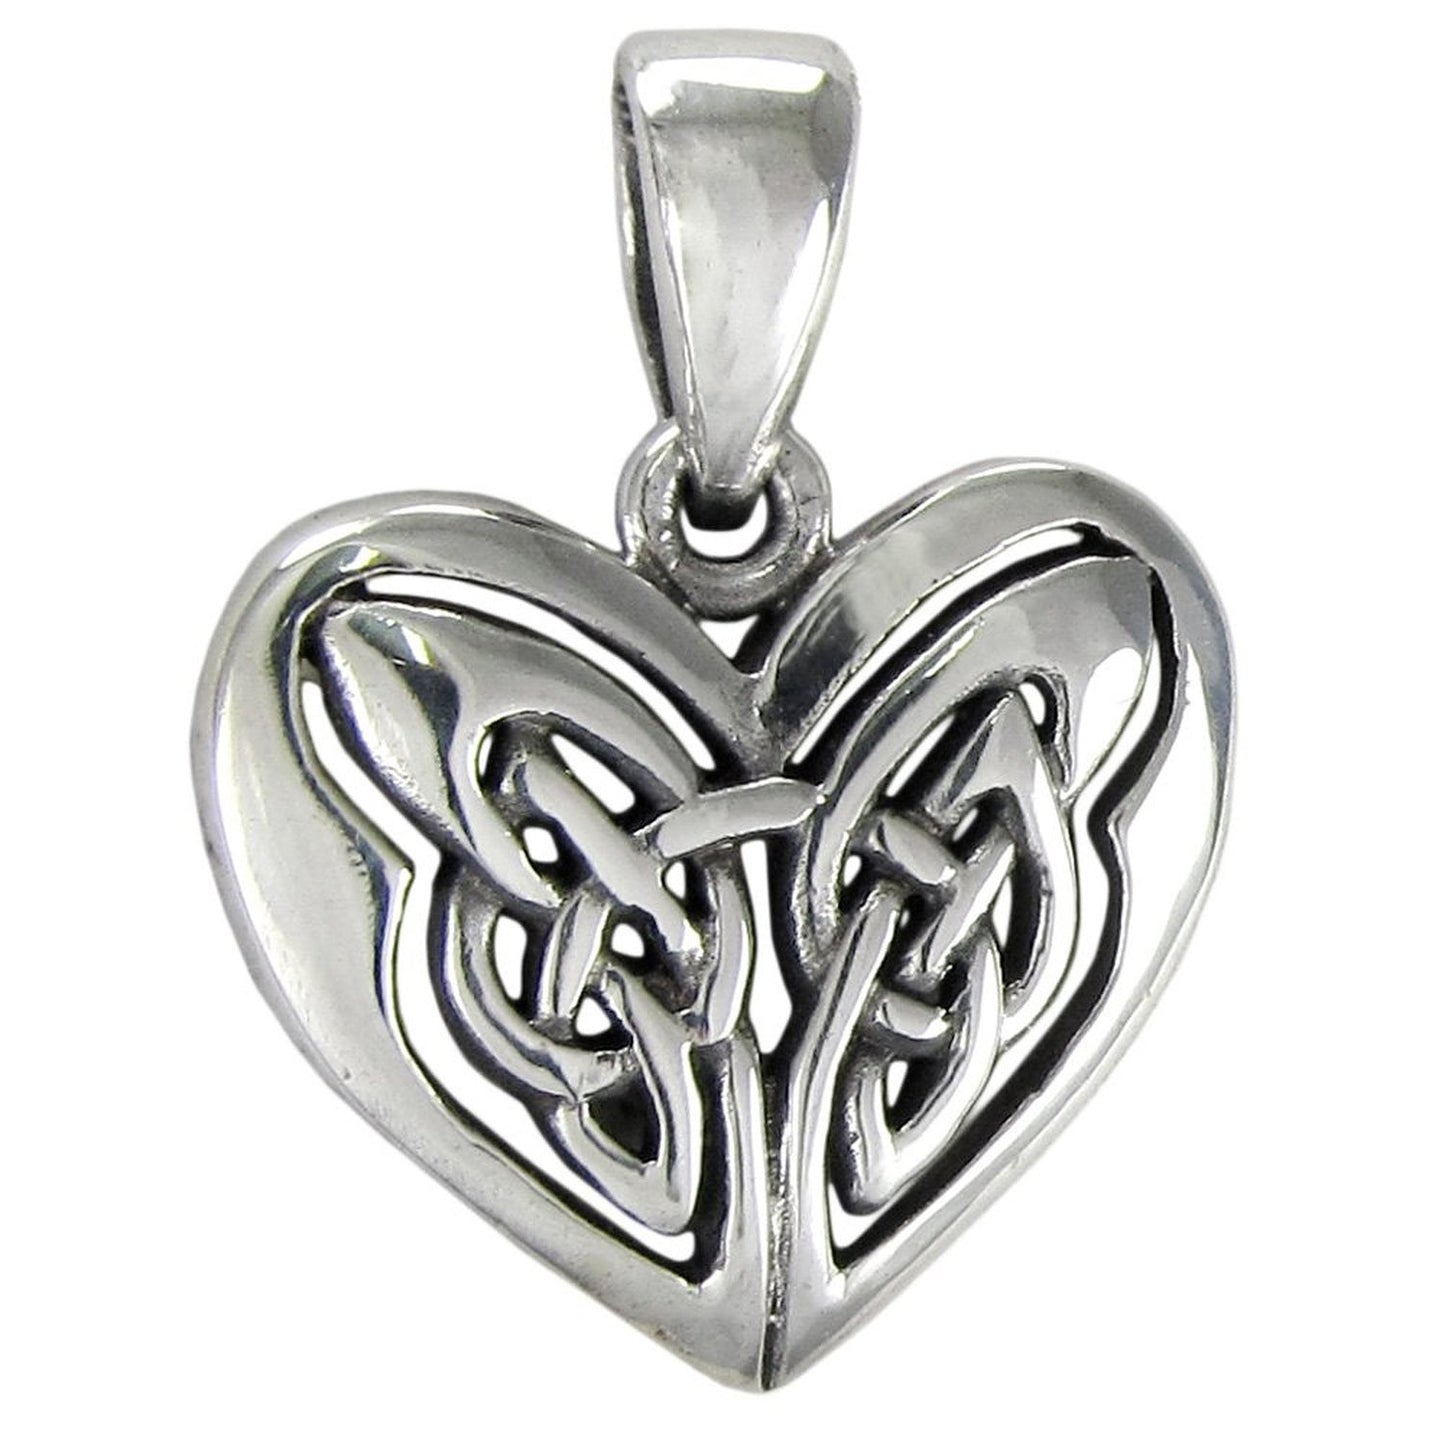 Celtic Knot Celtic Knot Eternal Heart Sterling Silver Pendant 18" Chain Necklace - Silver Insanity